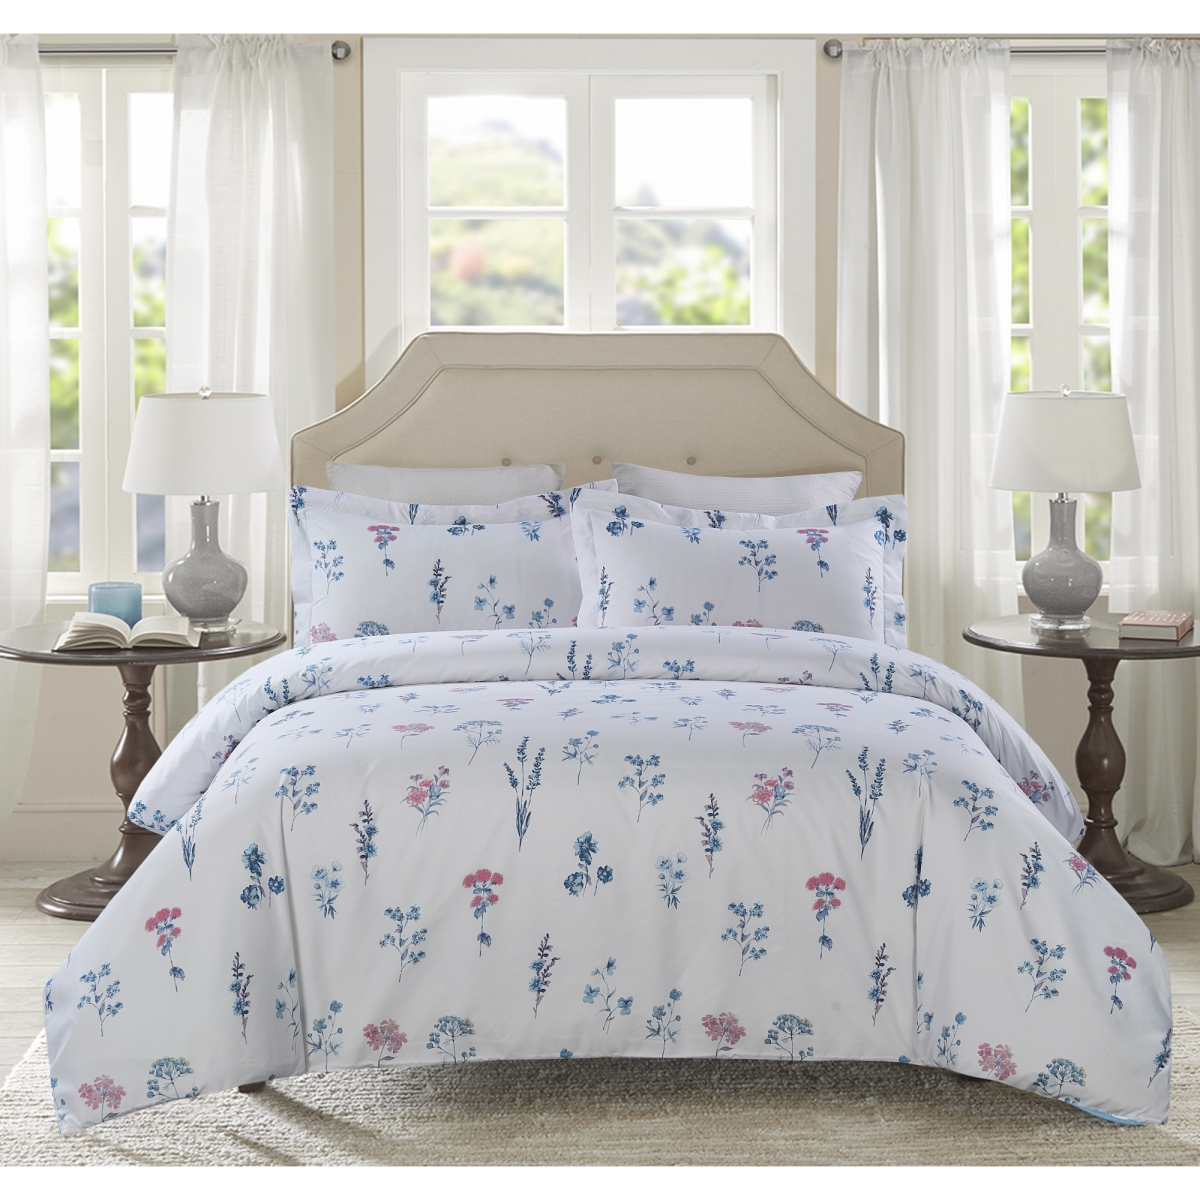 Whtx636-egk Microfiber Duvet Cover Set With Printed English Garden, King Size - 3 Piece